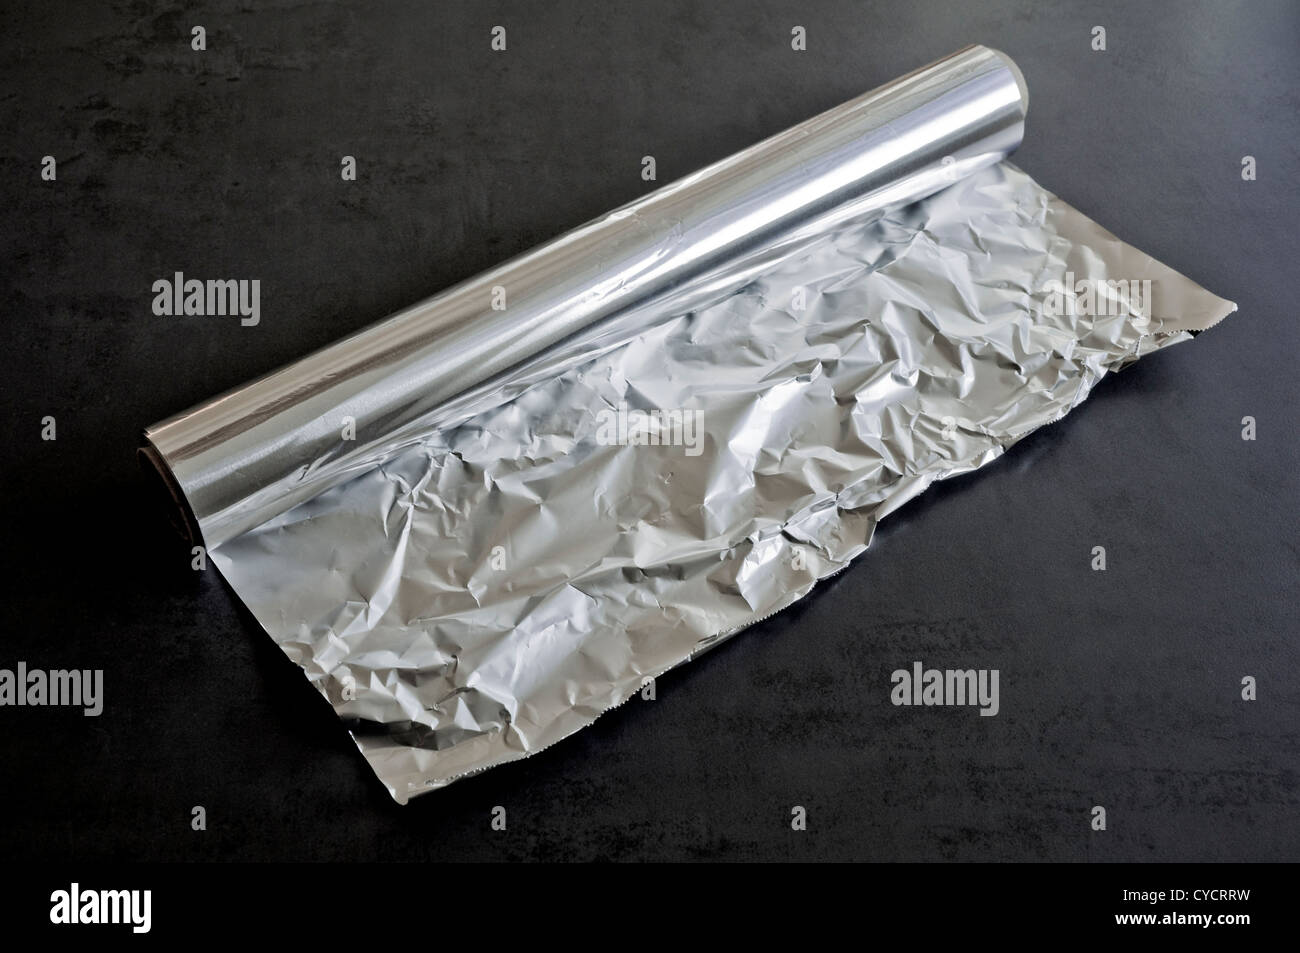 https://c8.alamy.com/comp/CYCRRW/aluminium-foil-a-roll-of-tin-foil-often-used-when-cooking-or-alternatively-CYCRRW.jpg